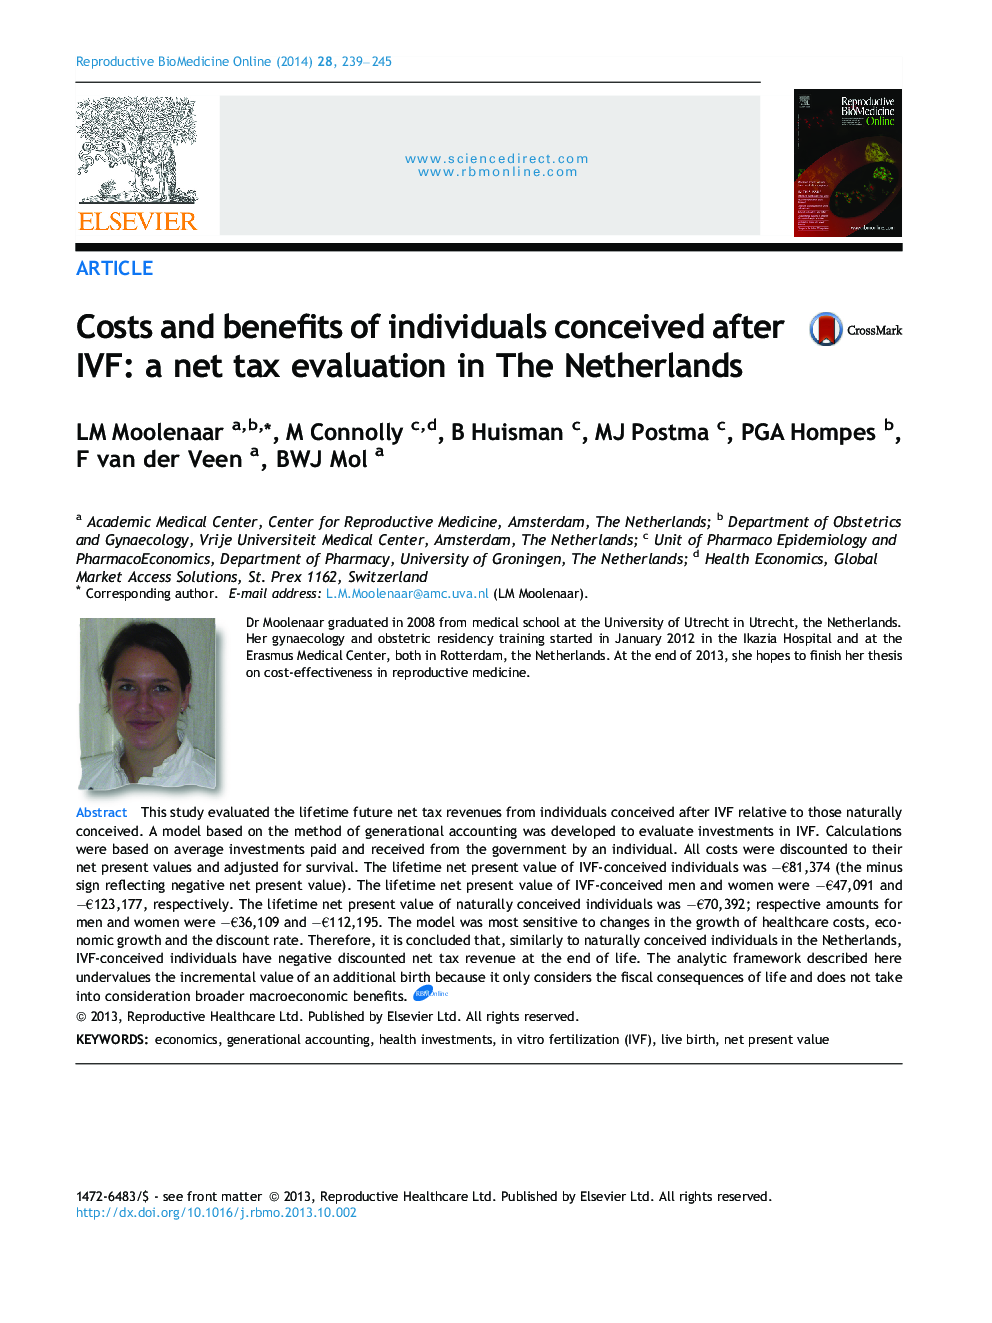 Costs and benefits of individuals conceived after IVF: a net tax evaluation in The Netherlands 